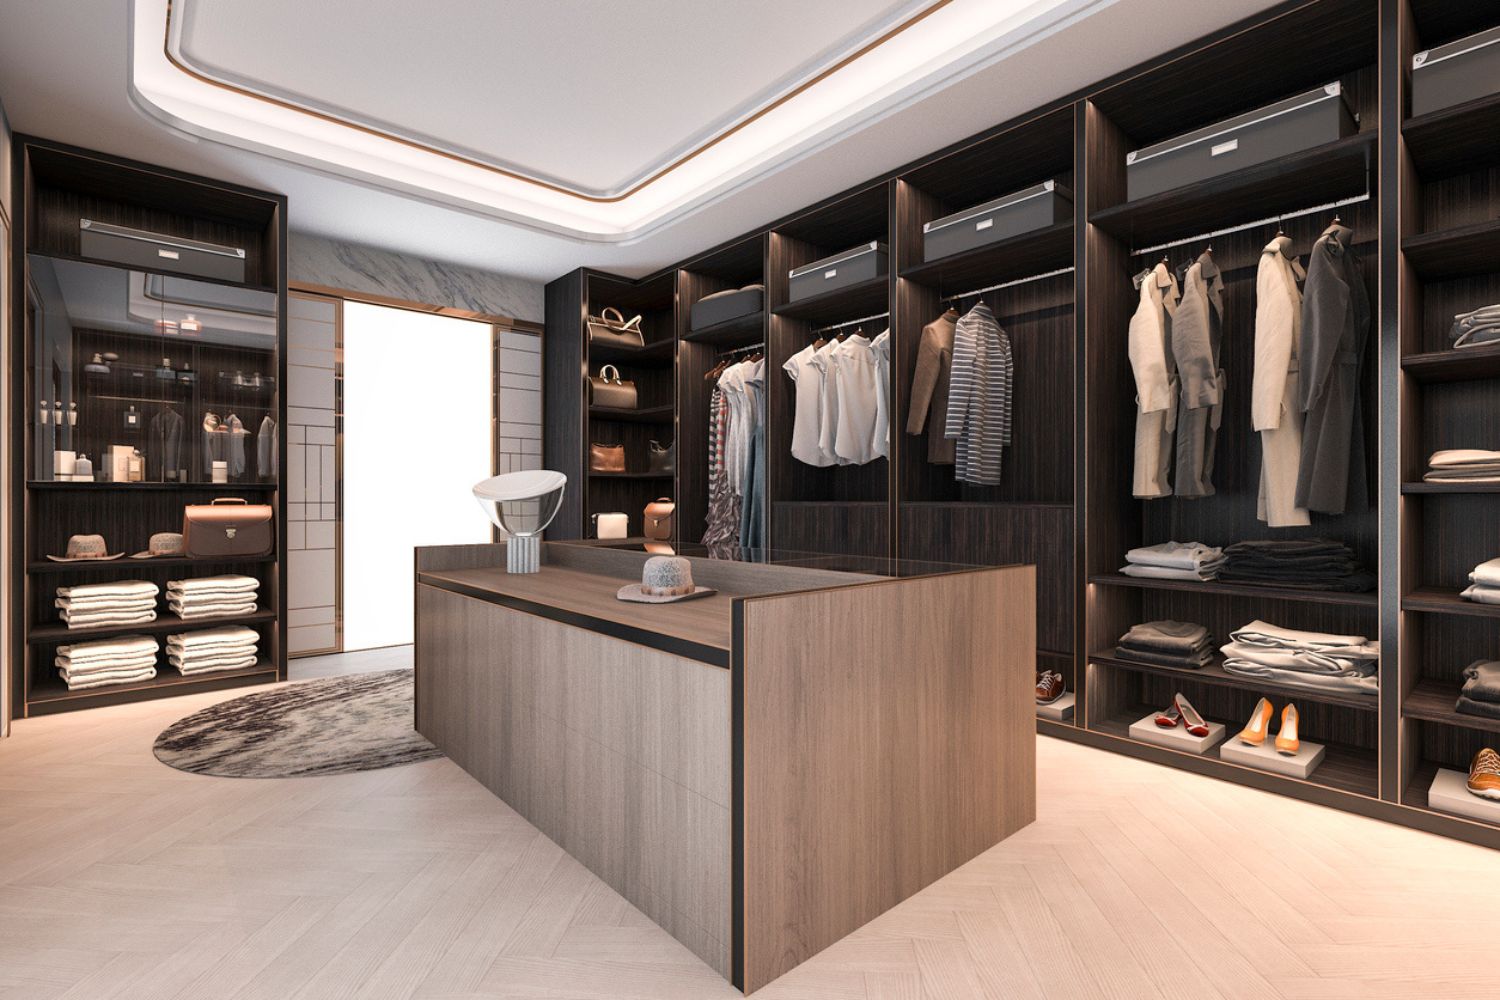 How Much Do Closets by Design Cost: Custom-built closet by Closets by Design with an estimated cost